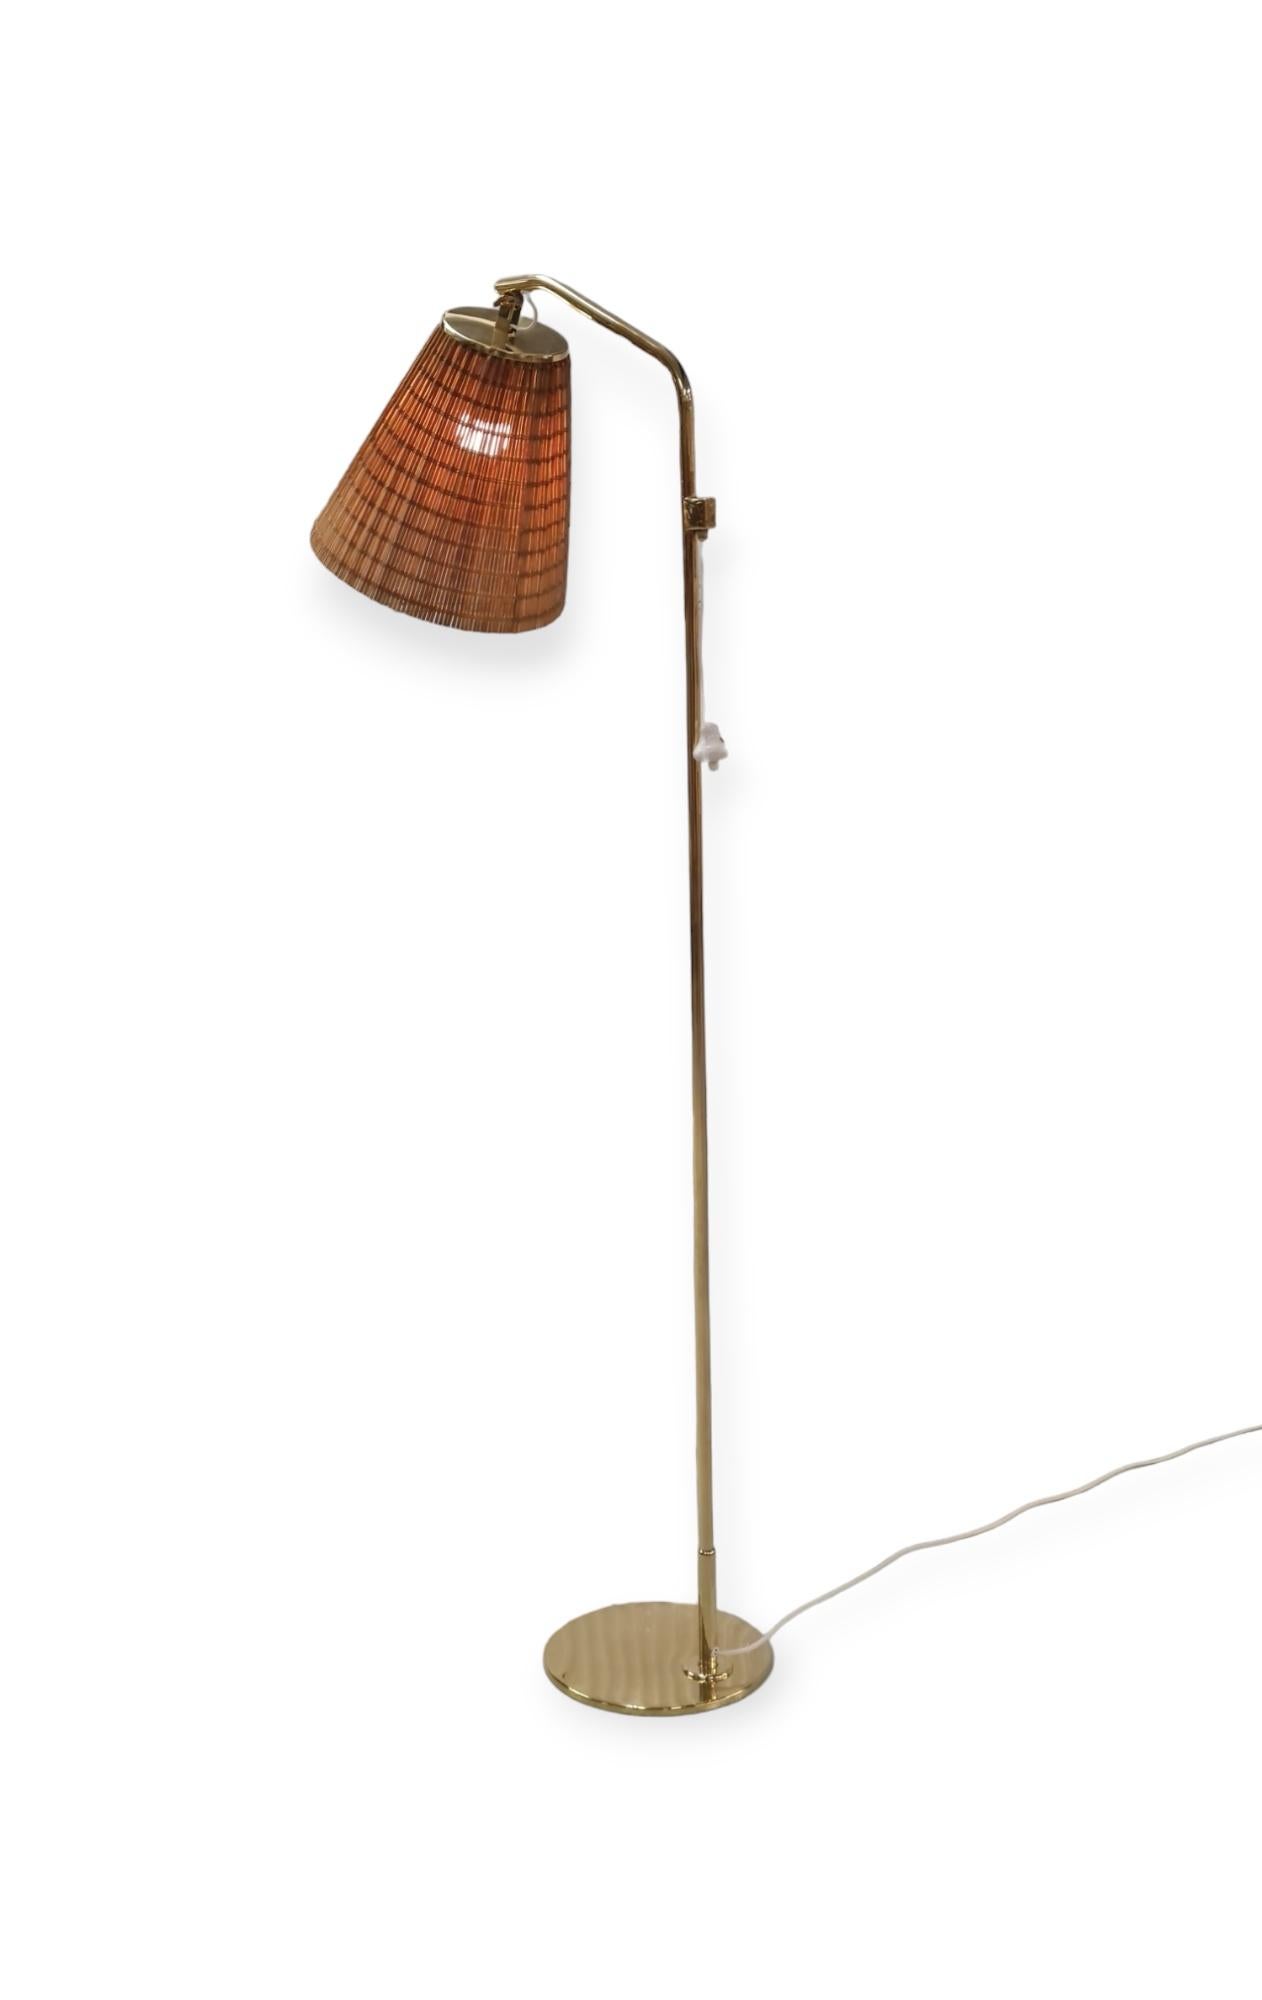 A sleek floor lamp by the master designer Paavo Tynell. This minimalistic floor lamp model 9613 carries an elegance in it's simplicity. The shade is adjustable which makes this lamp perfect for reading spaces, bedrooms or living room corners. The